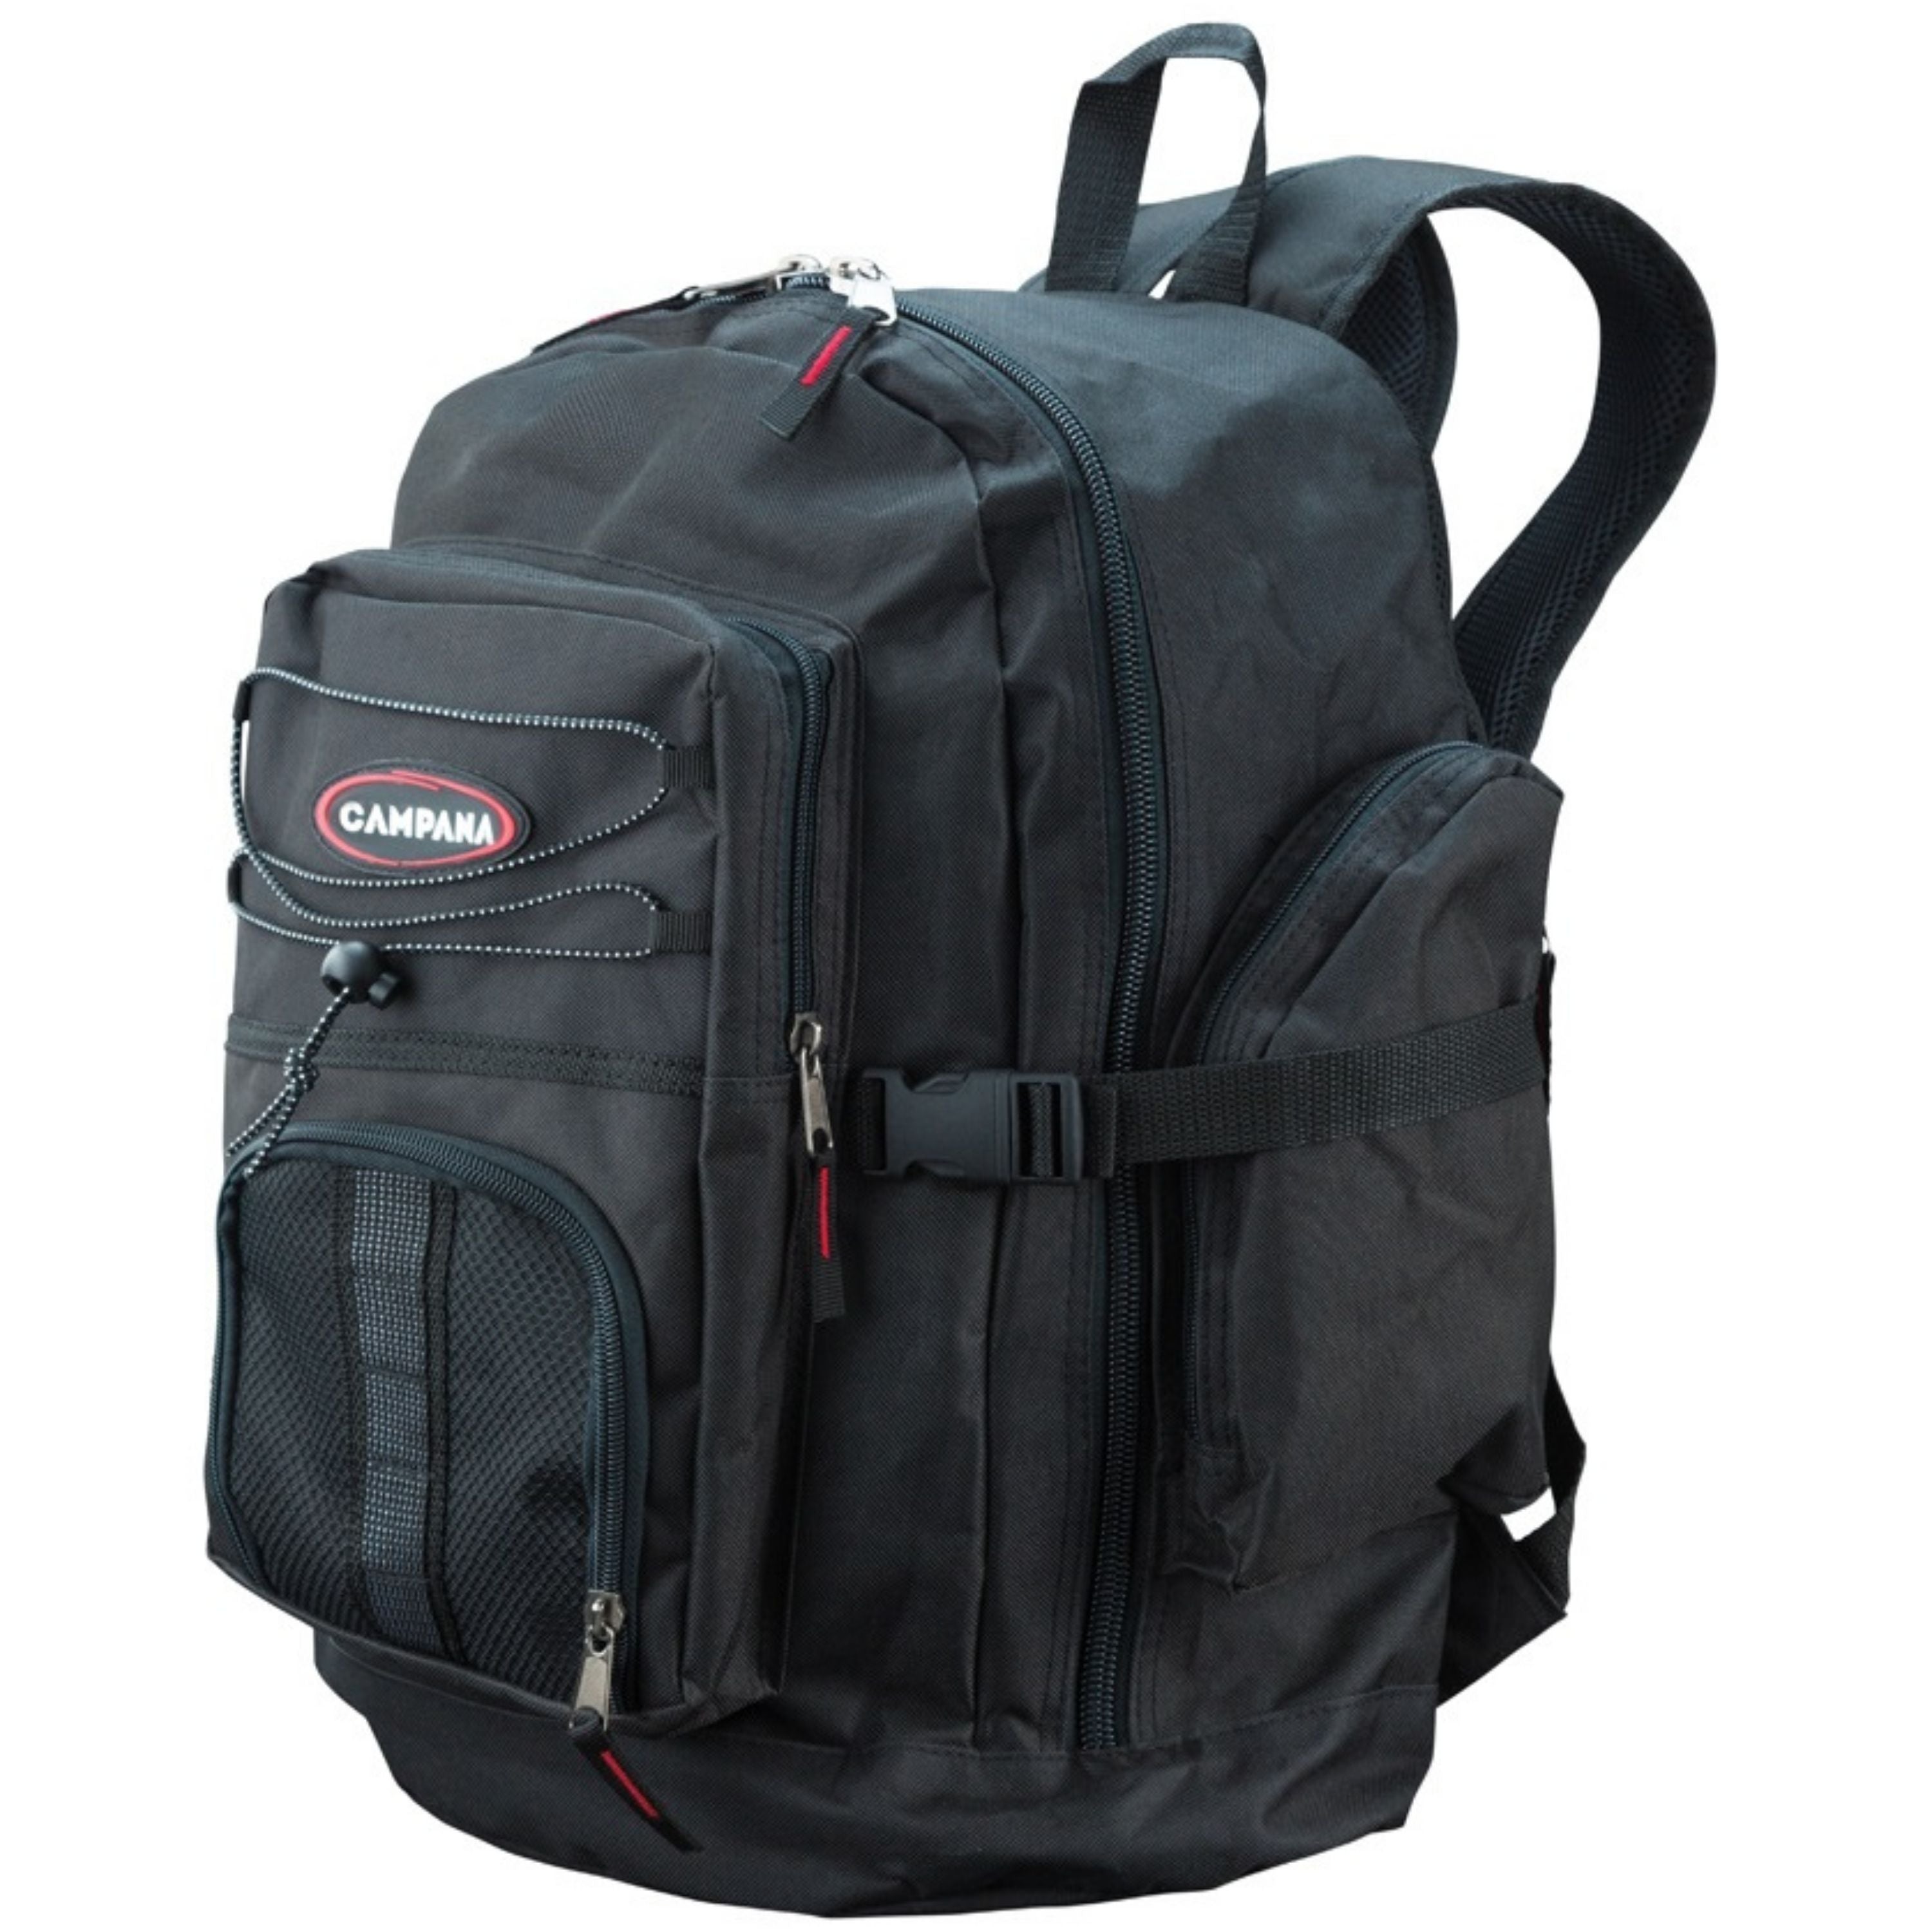 "Access" Backpack - 35L